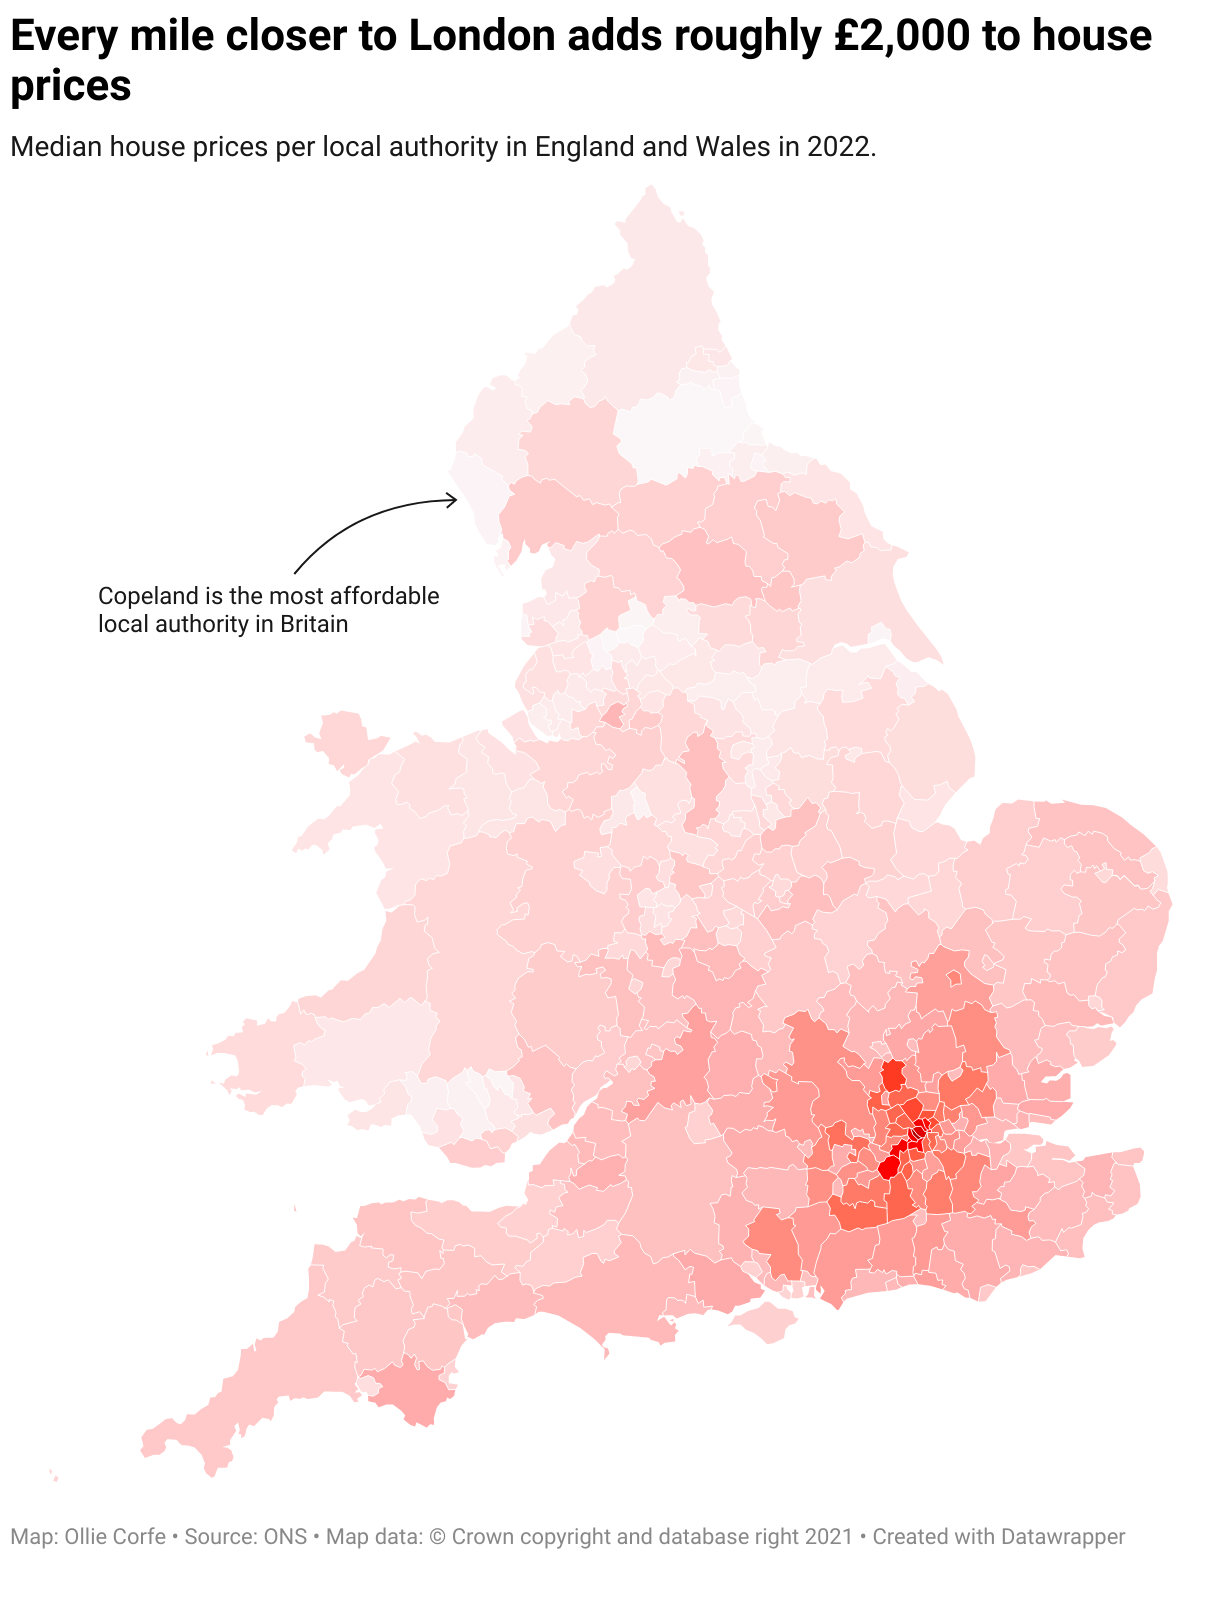 Median house prices per local authority in Britain.